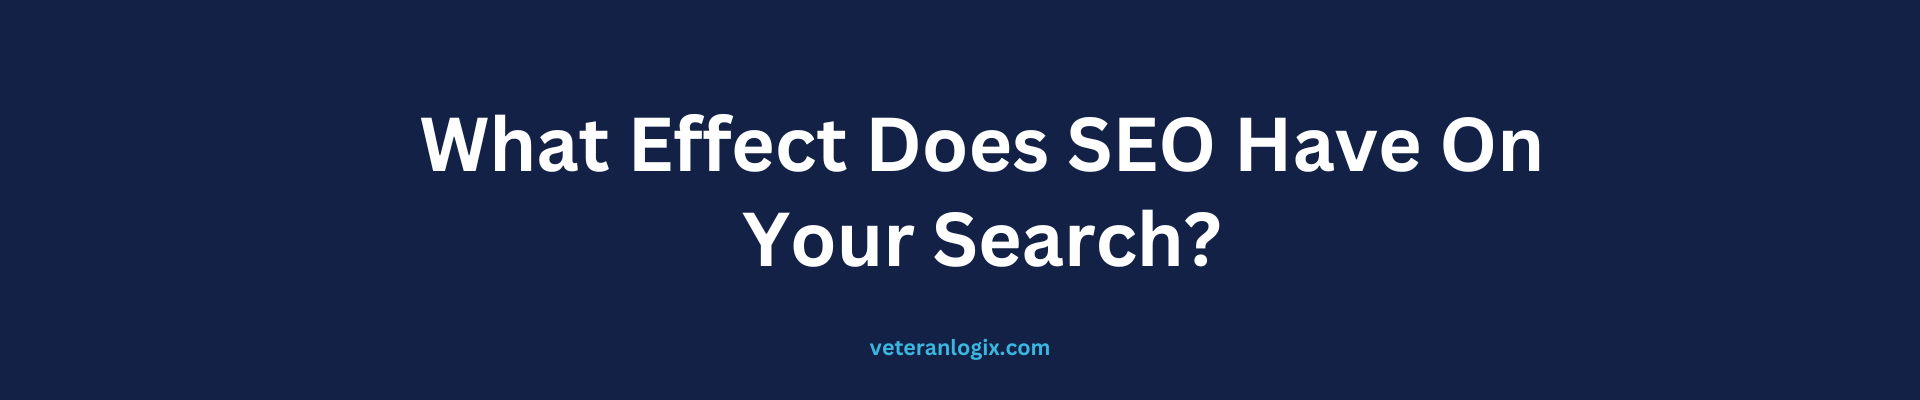 what effect does seo have on search